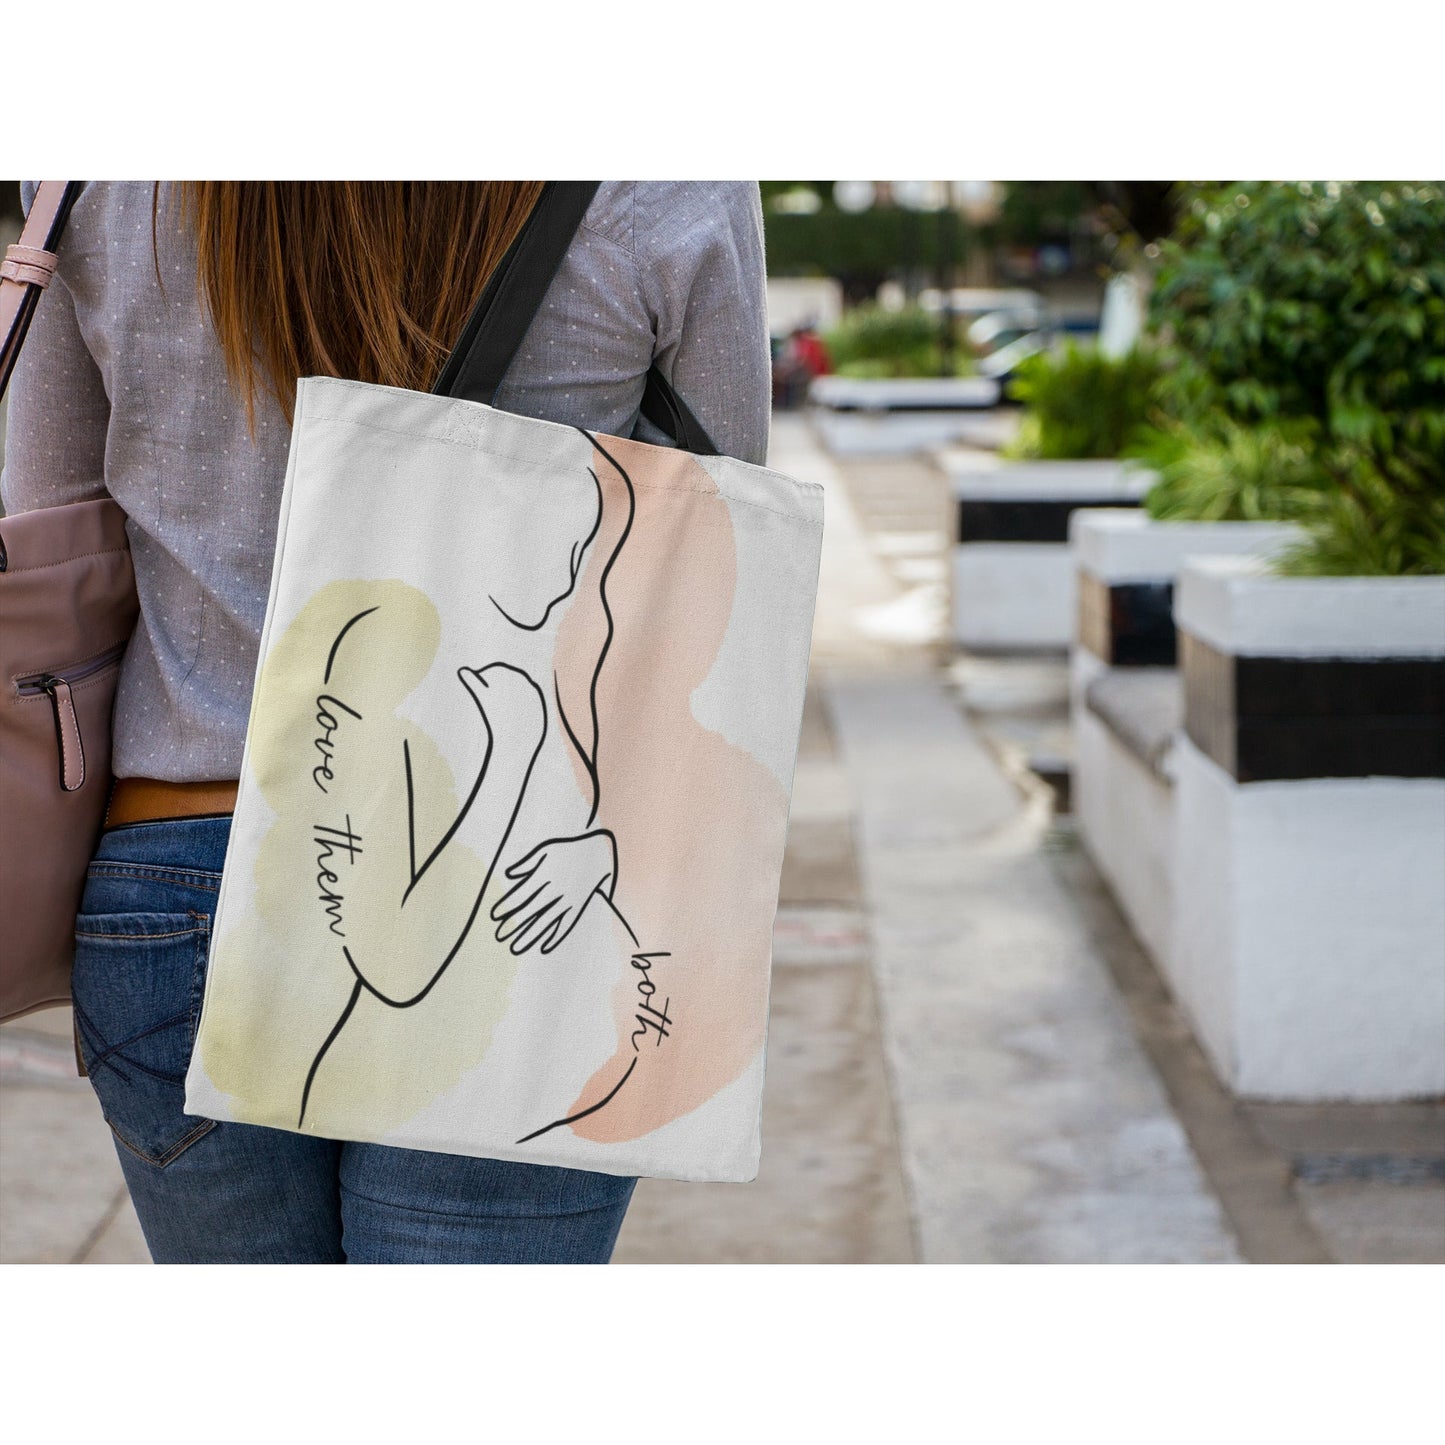 Love Them Both | Pro-Life Tote Bag for Women